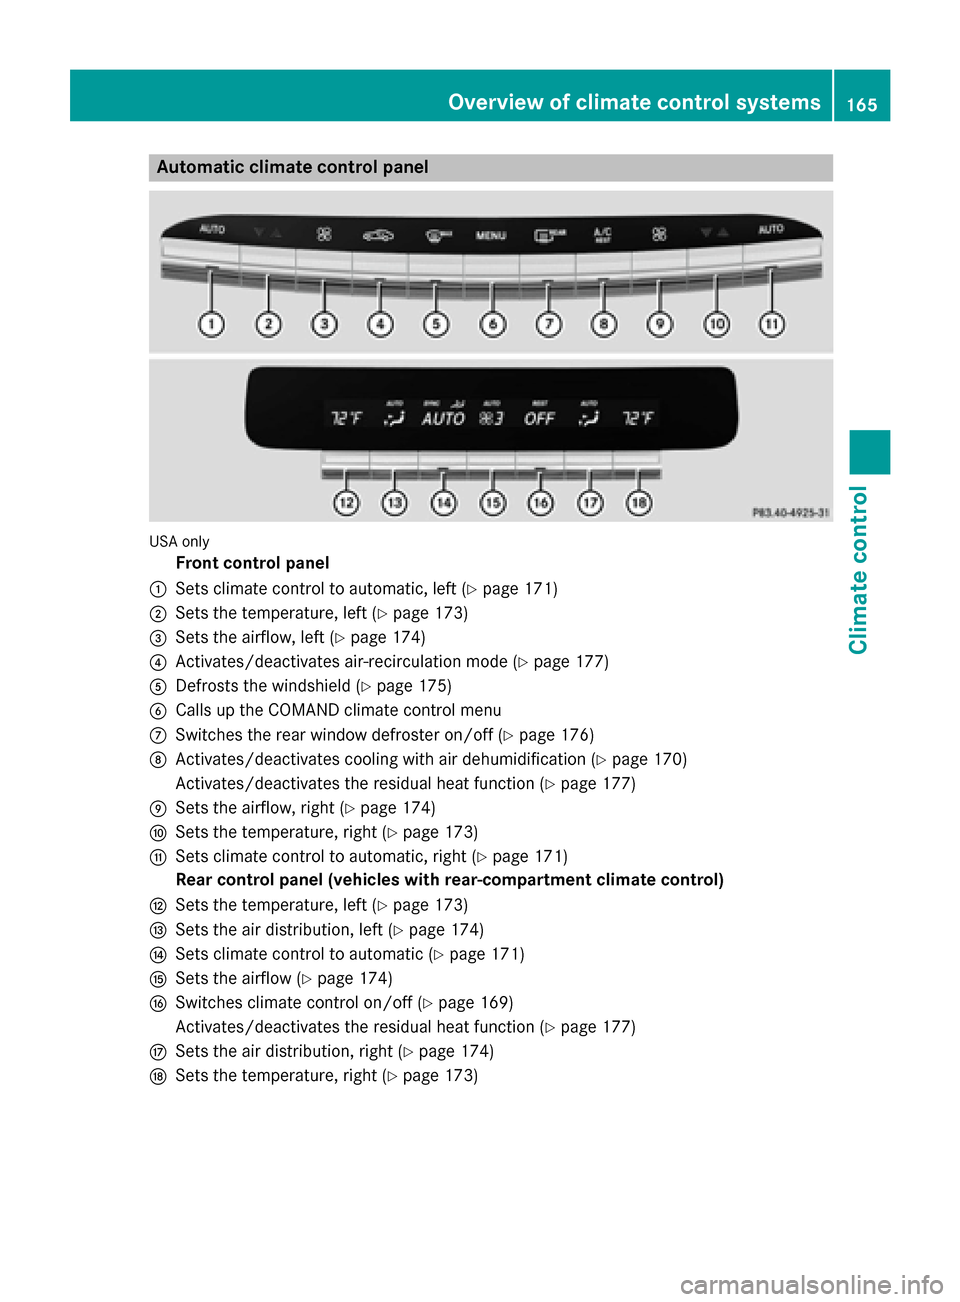 MERCEDES-BENZ S-Class 2015 W222 Owners Manual Automatic climate control panel
USA only
Front control panel
: Sets climate control to automatic, left (Y page 171)
; Sets the temperature, left (Y page 173)
= Sets the airflow, left (Y page 174)
? Ac